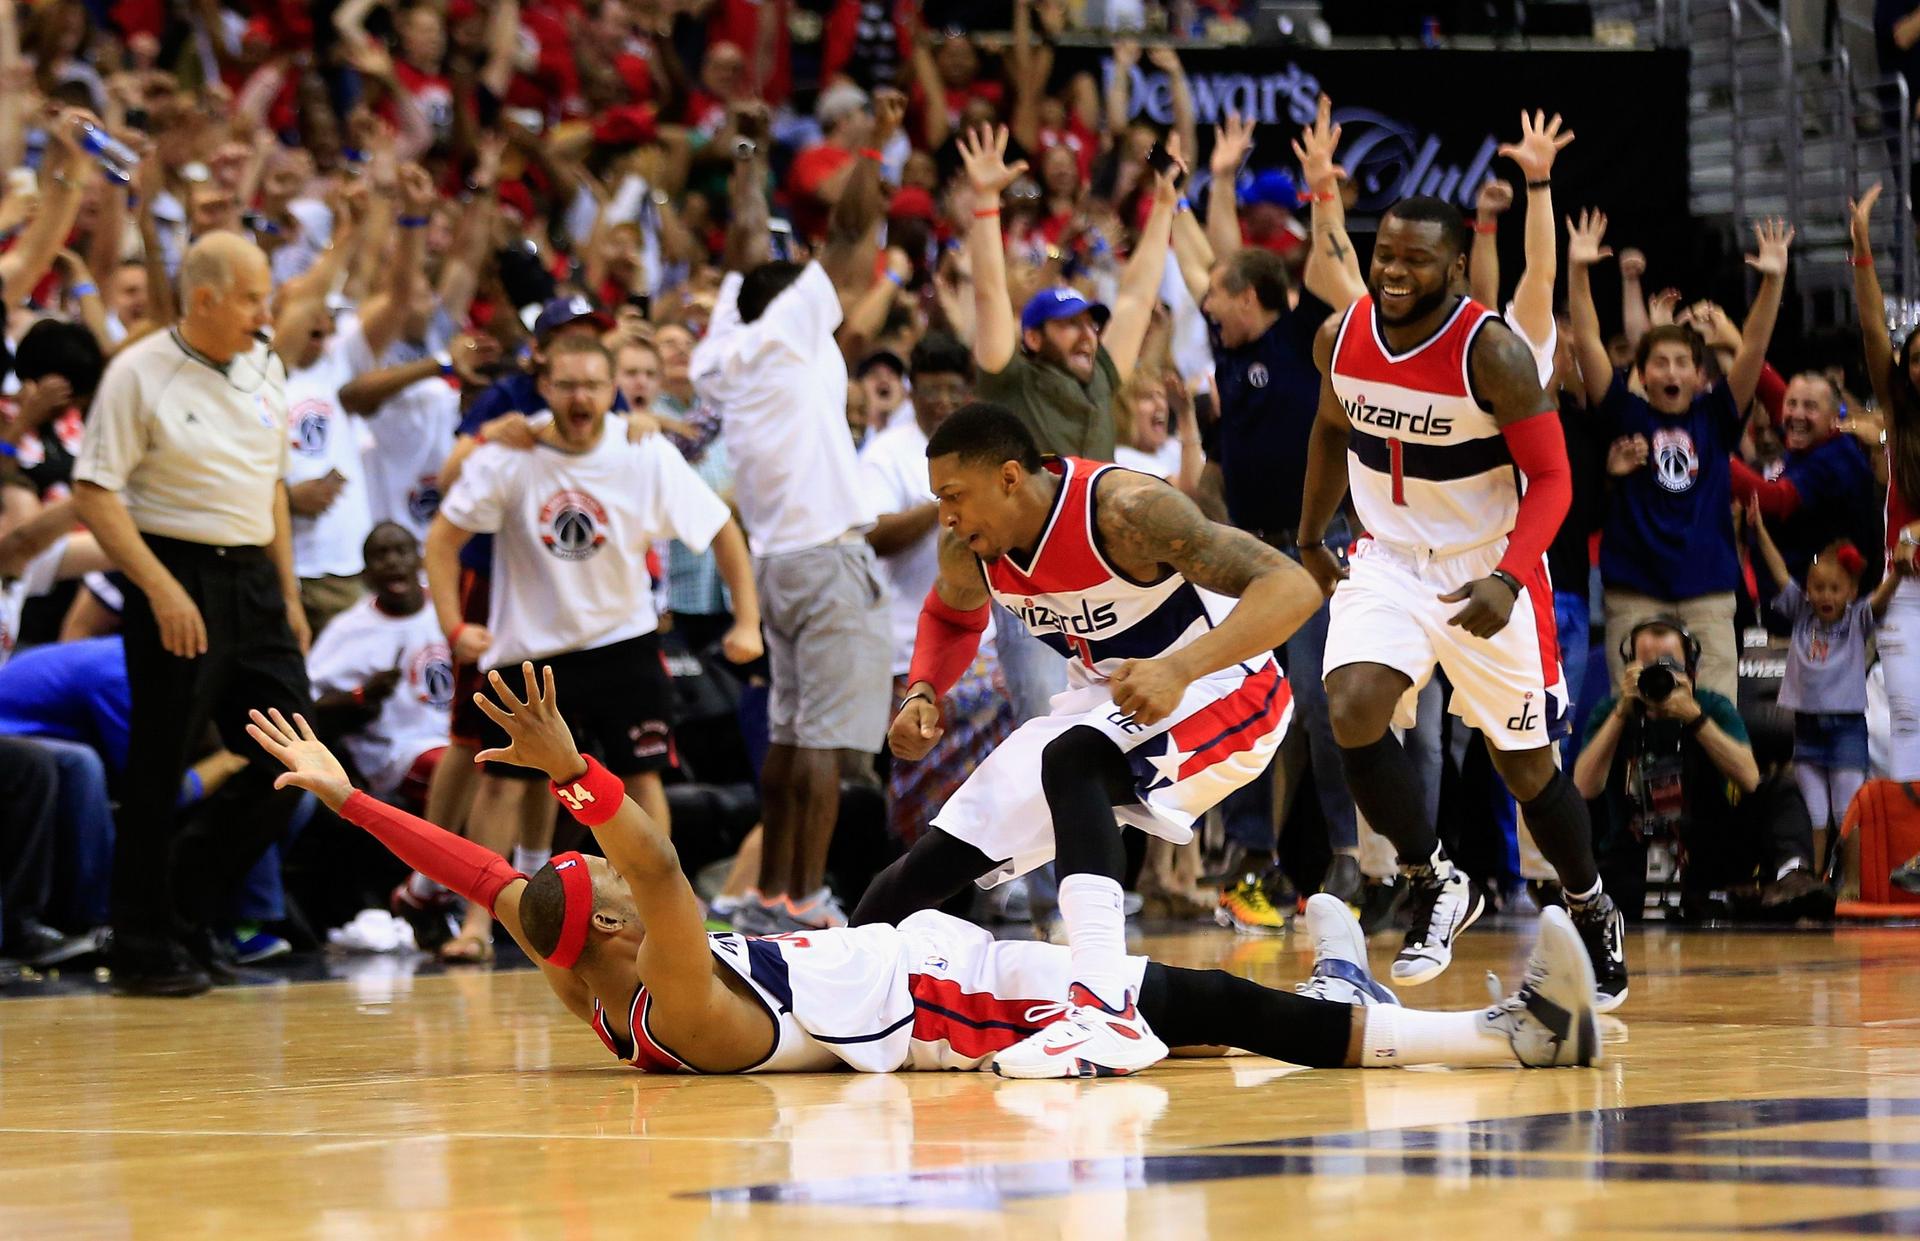 Paul Pierce, of the Washington Wizards, collapses to the floor to celebrate his winning shot with teammate Bradley Beal in their game against the Atlanta Hawks. Photo: AFP